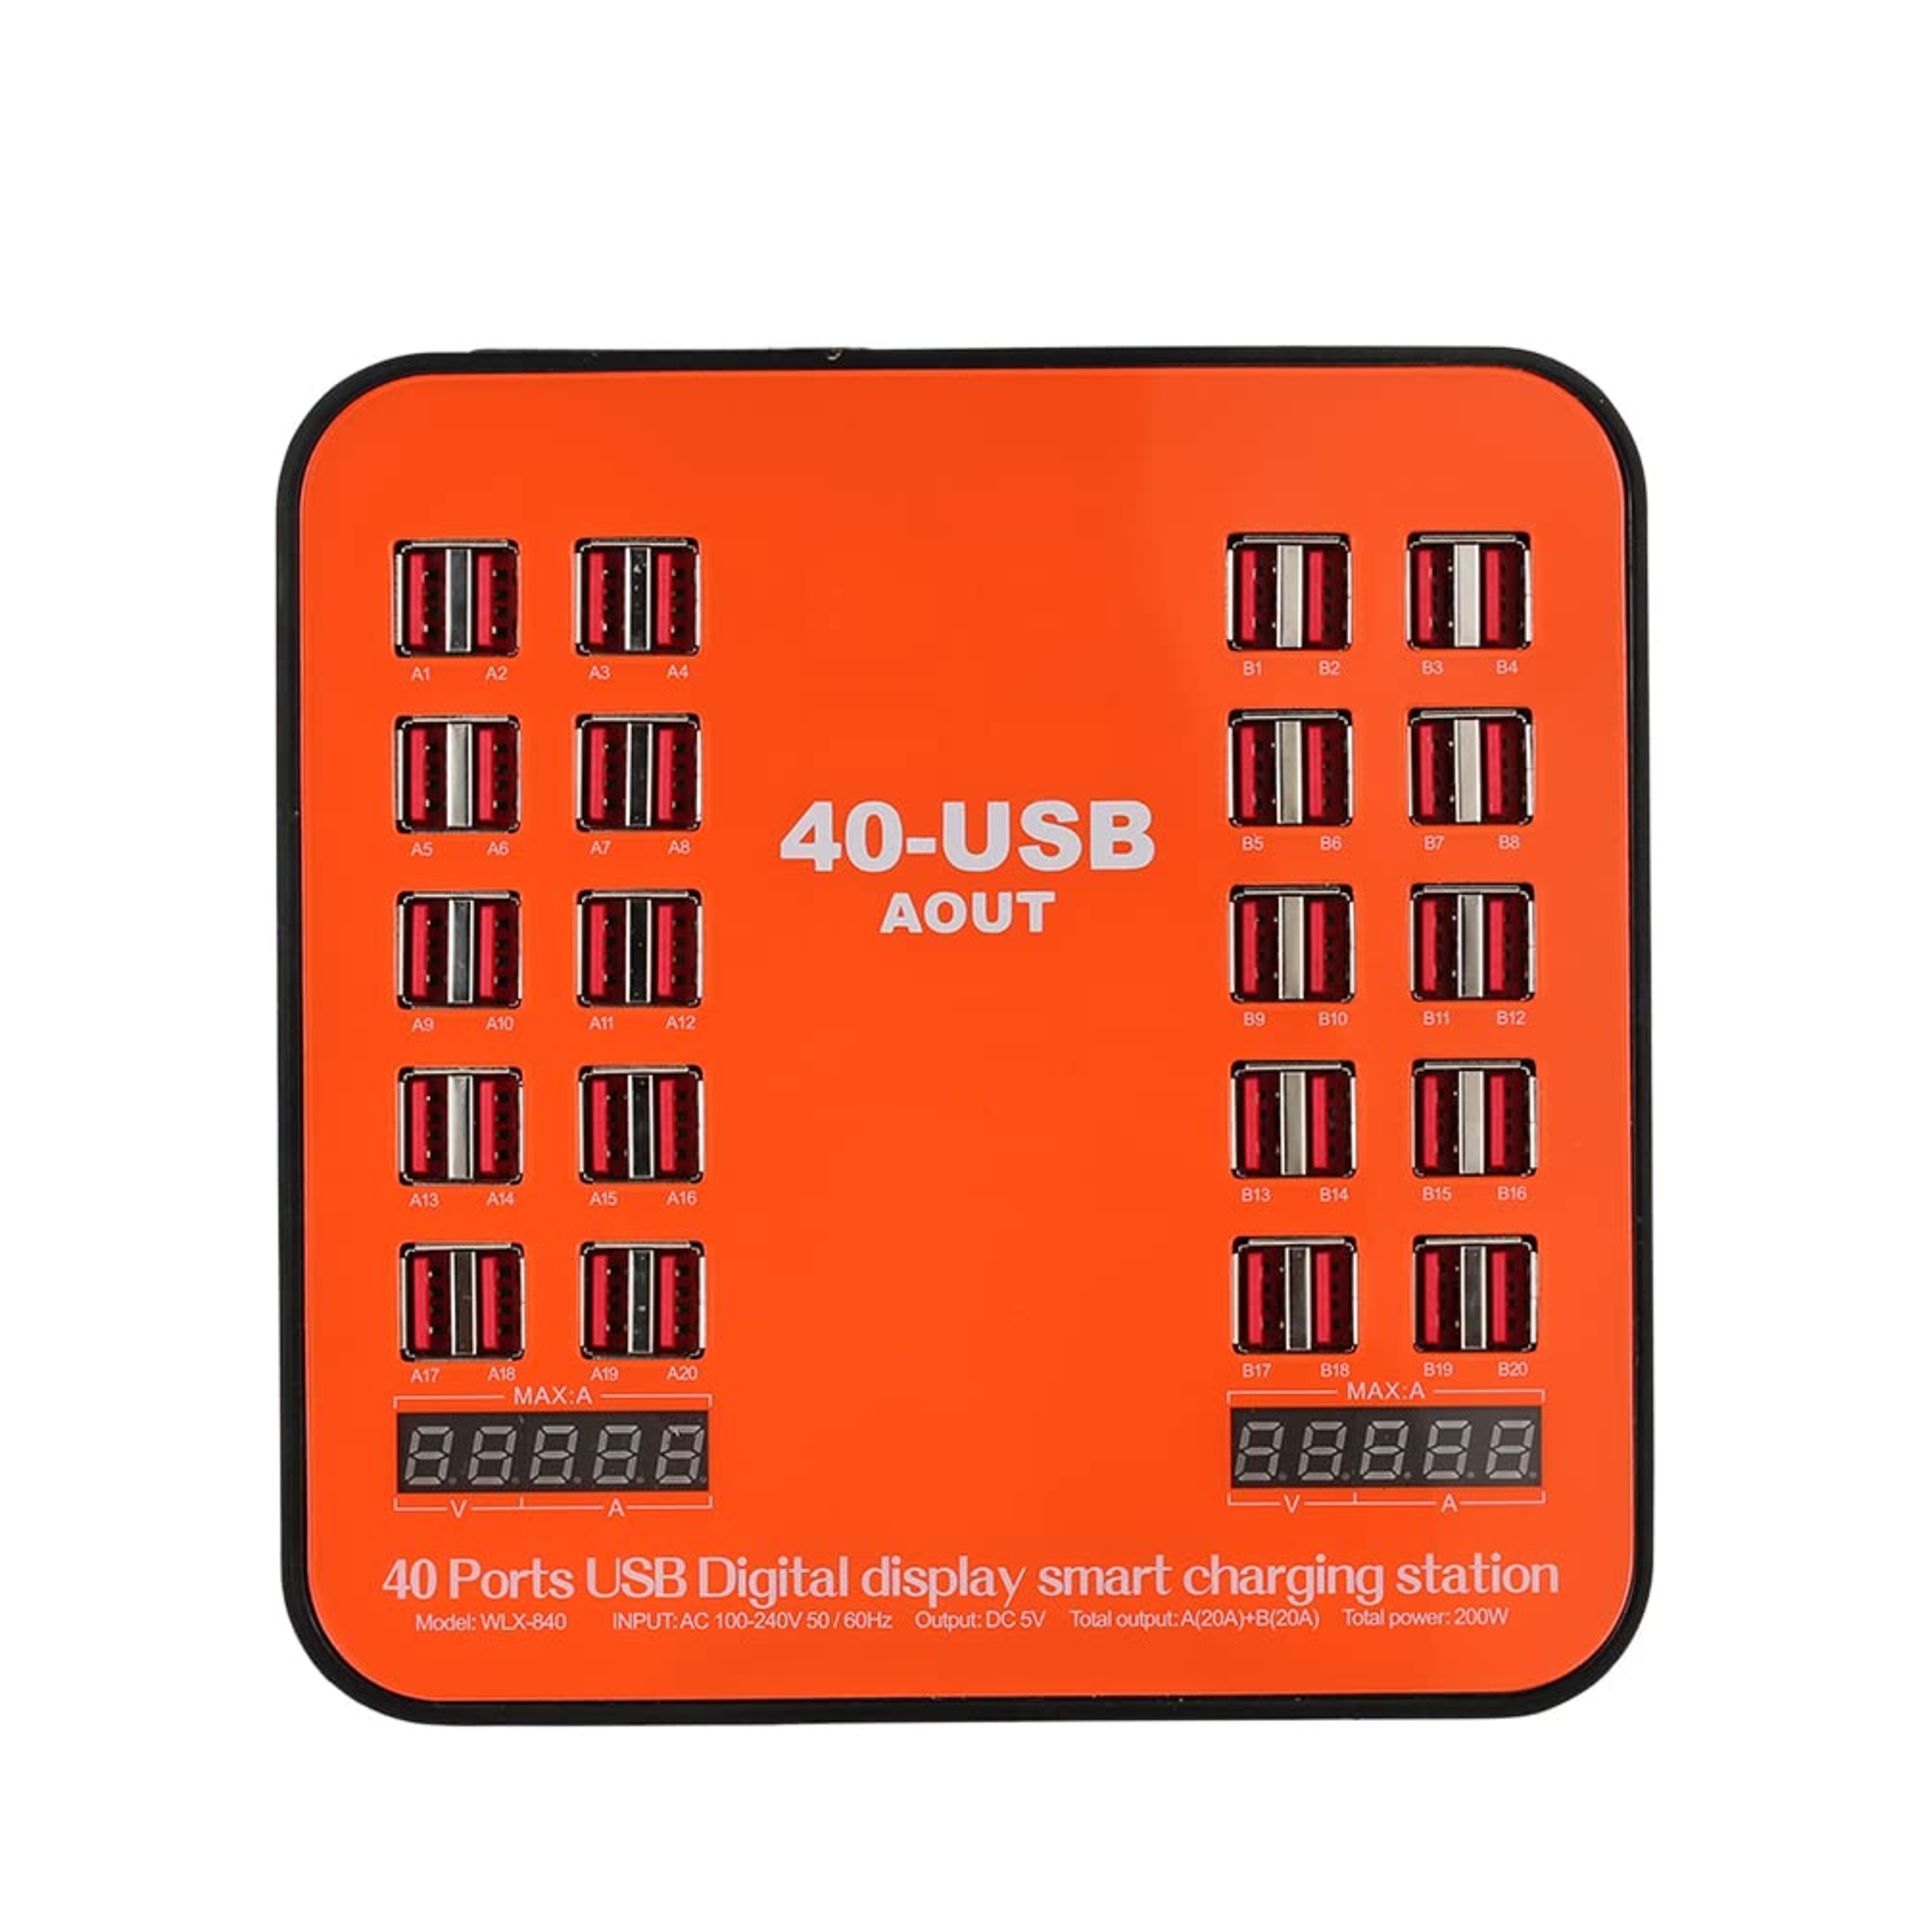 1 x THE MARS 200W 40-Port USB Wall Charger Dual Digital Display Smart Charging Station - Includes - Image 5 of 5